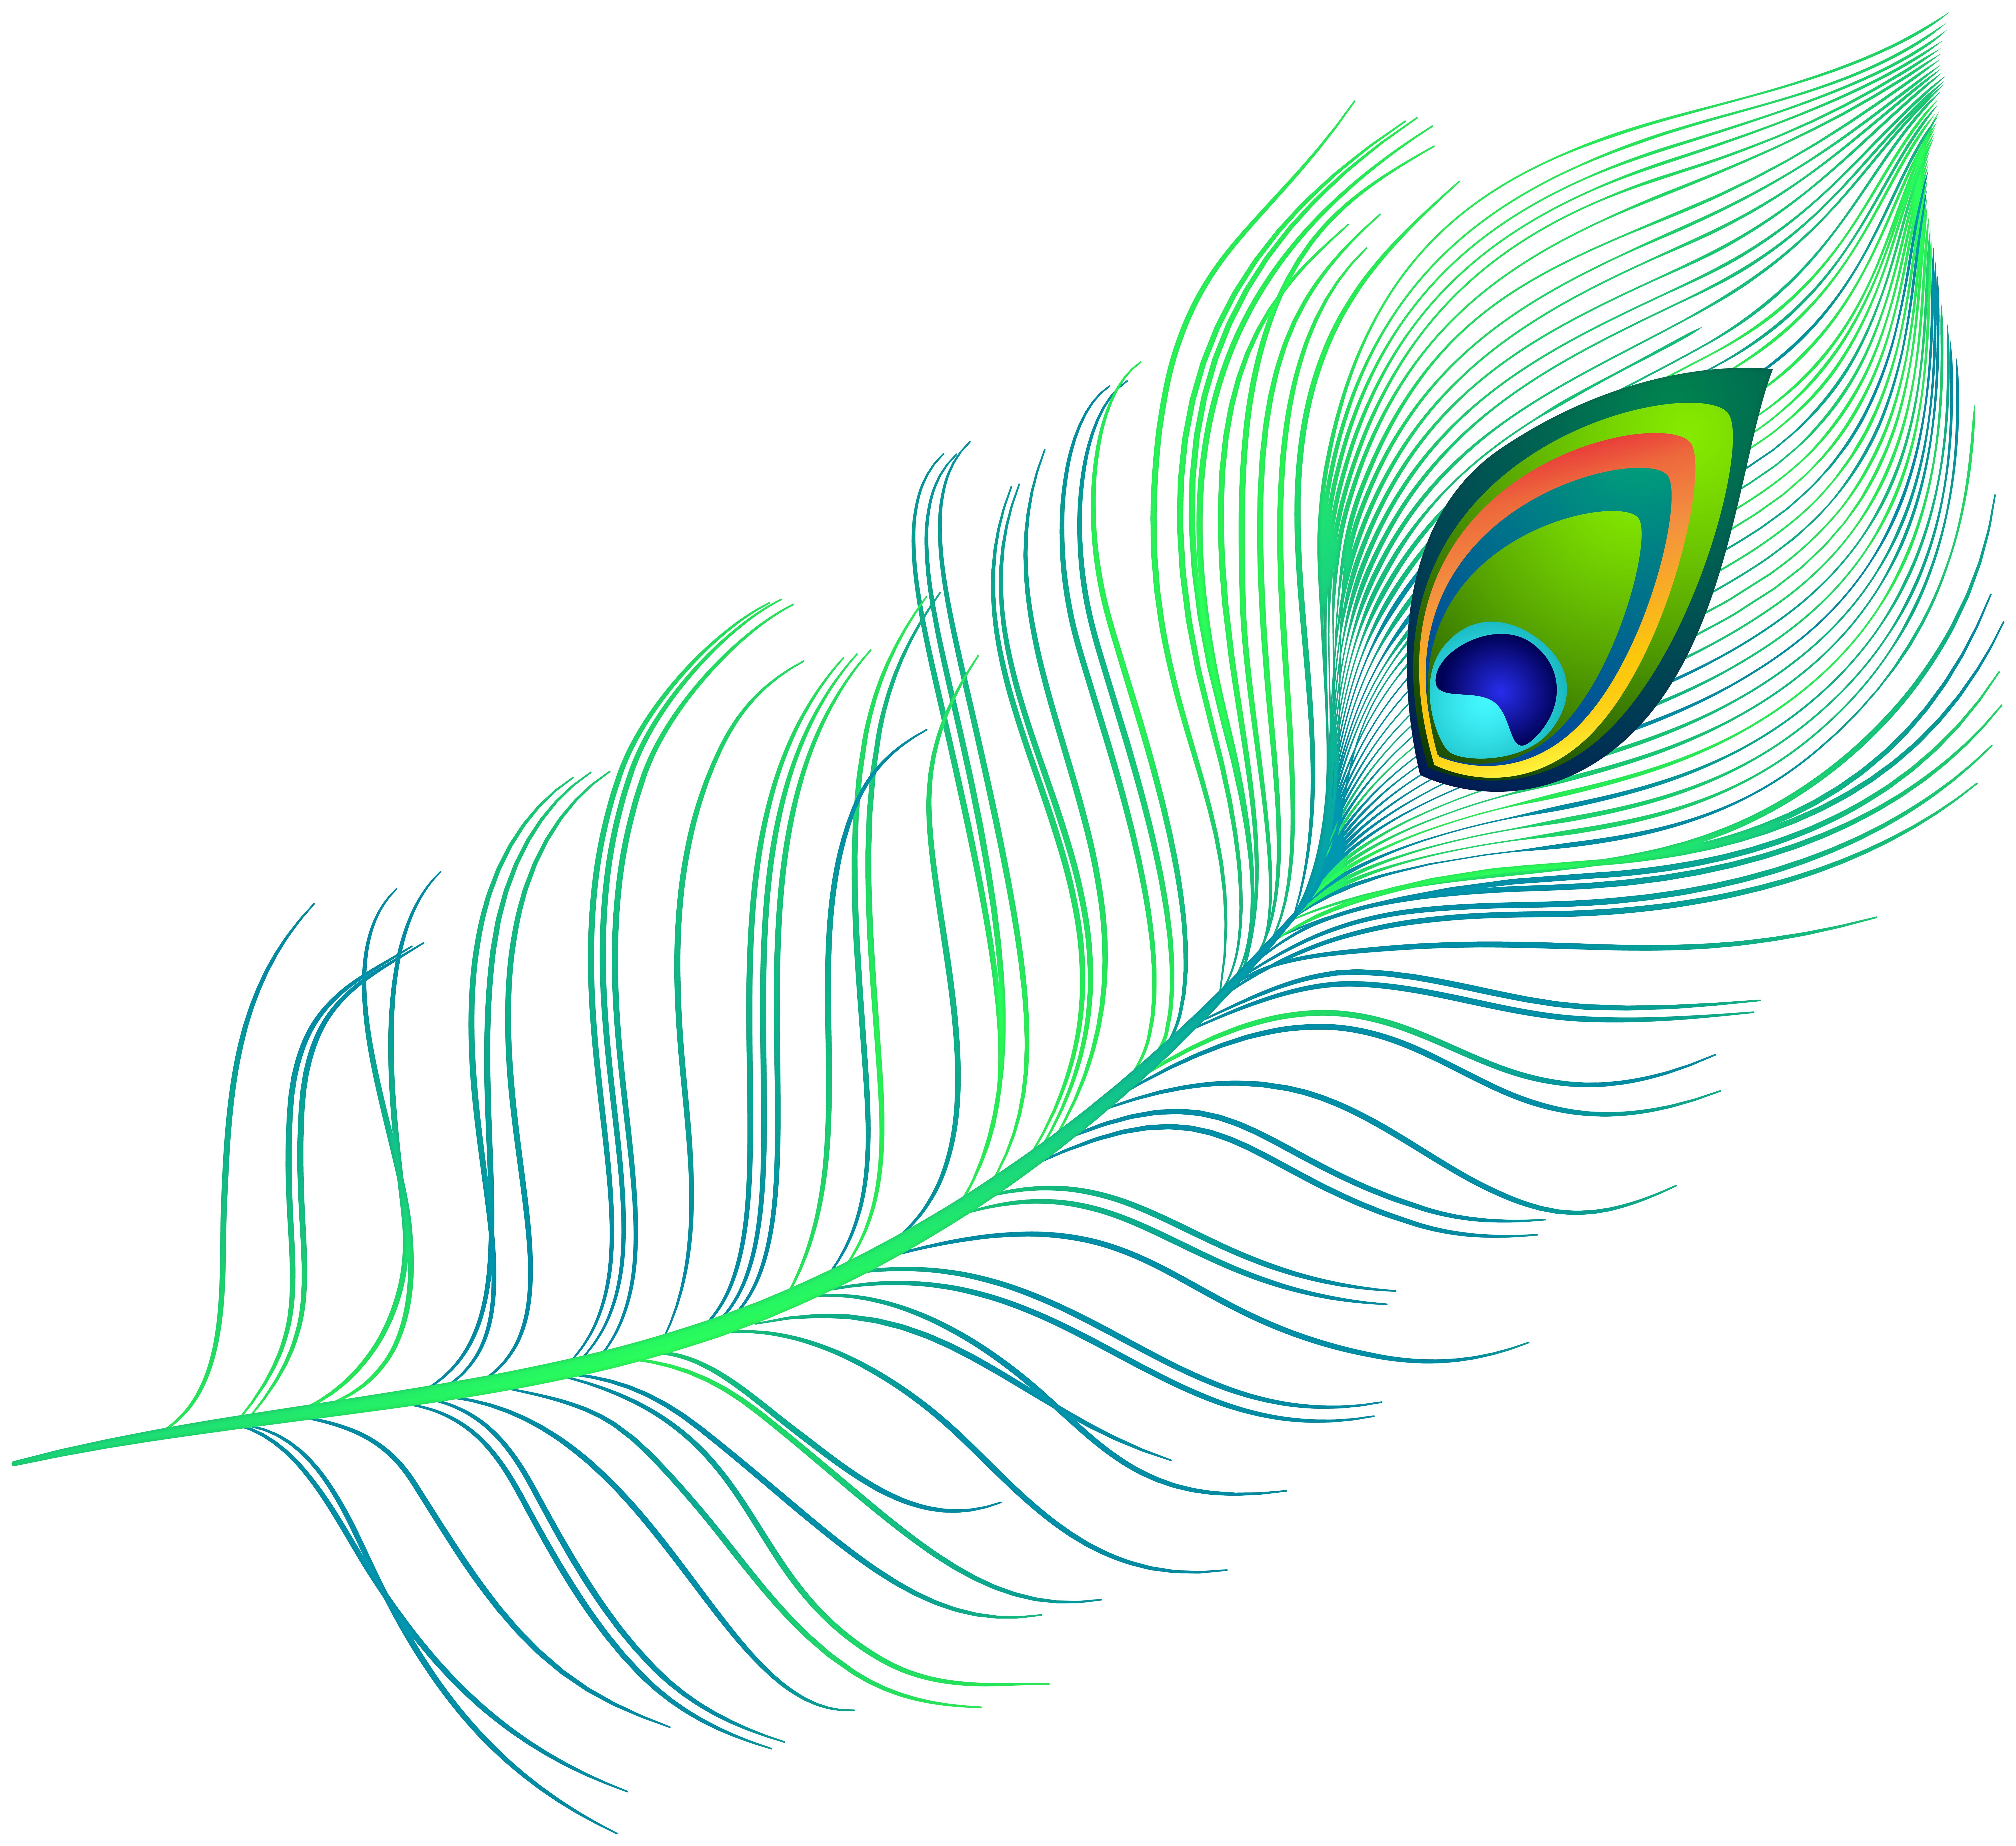 green feather PNG